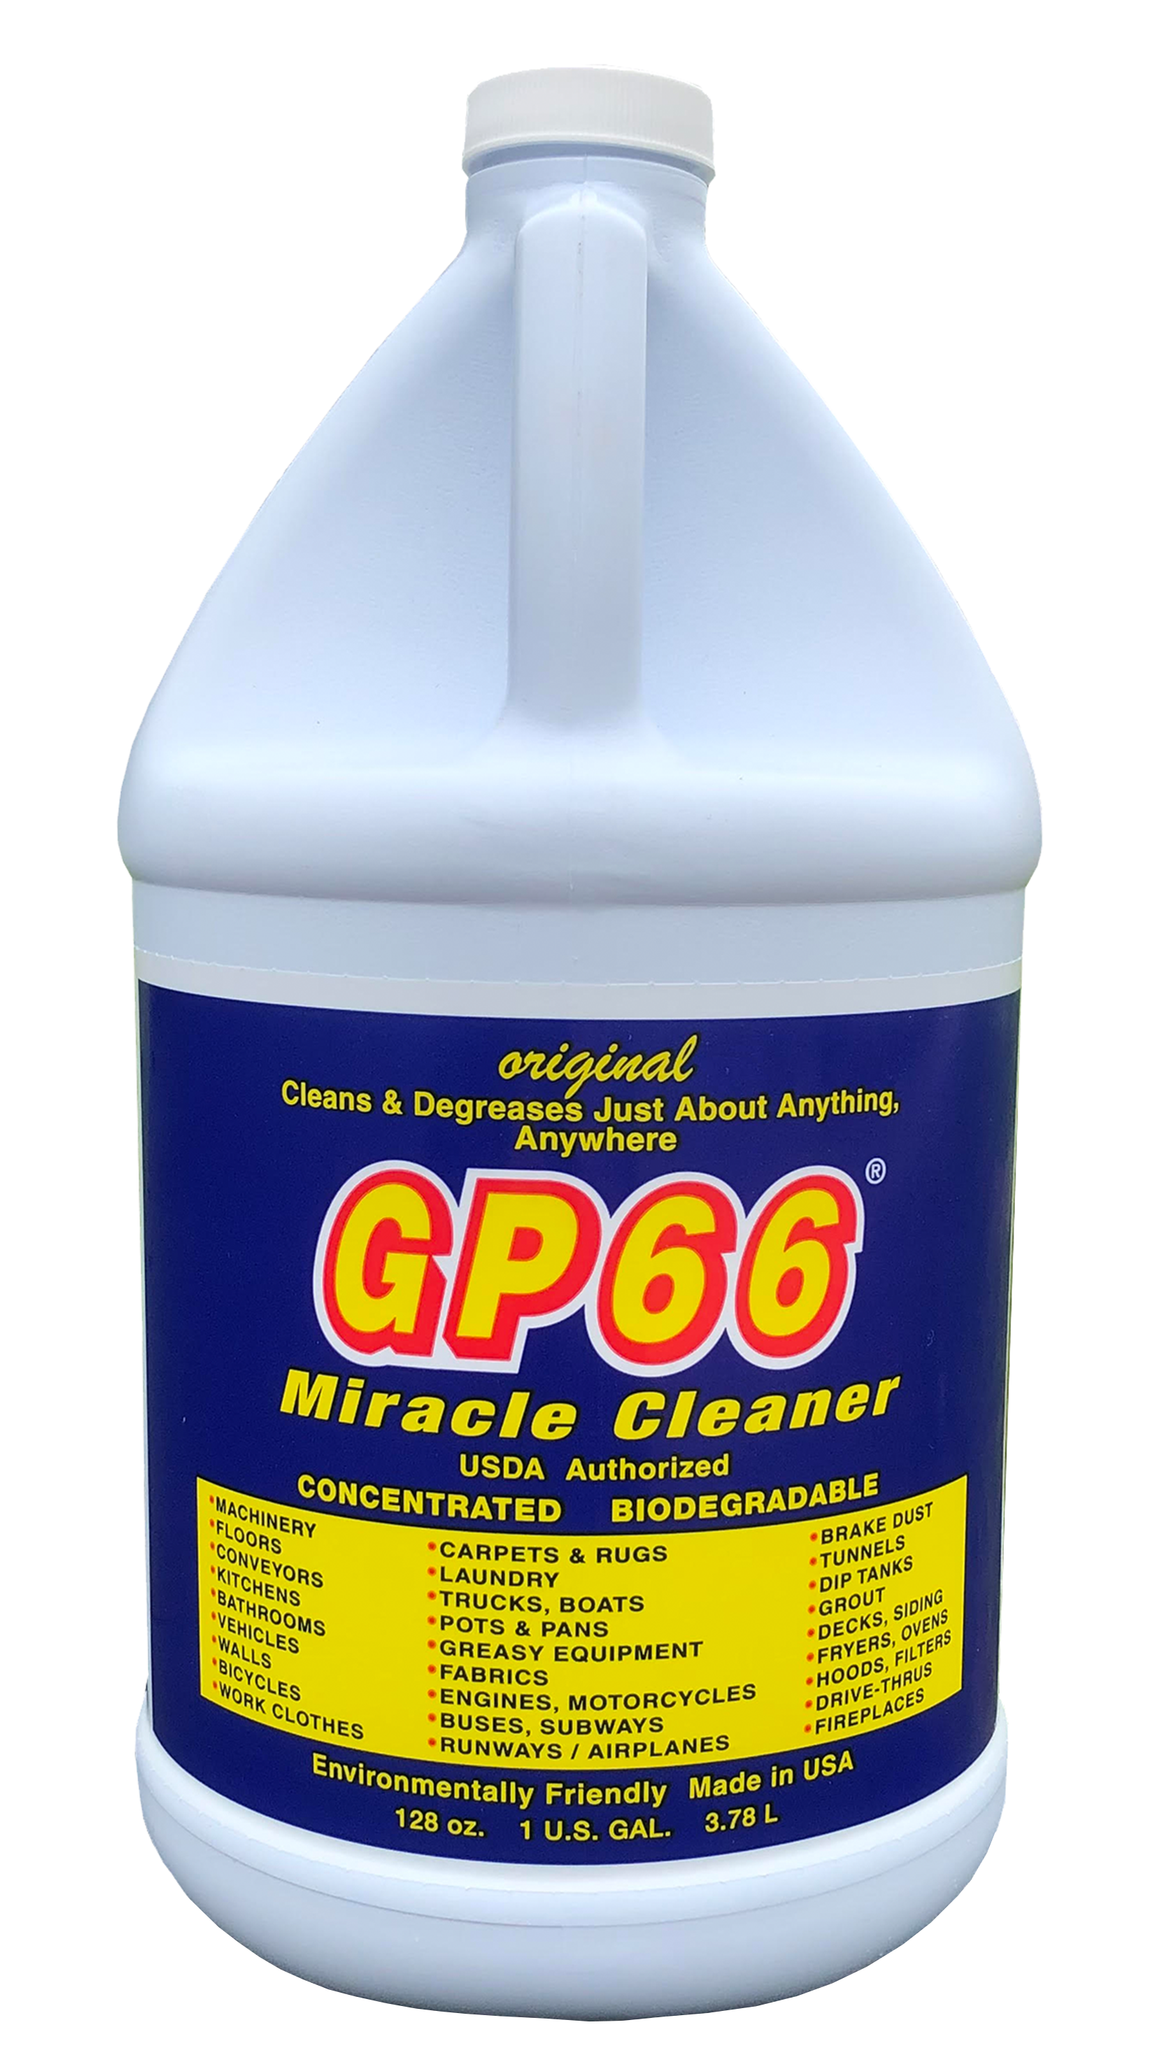 https://cdn2.momjunction.com/wp-content/uploads/product-images/gp66-miracle-cleaner_afl2312.png